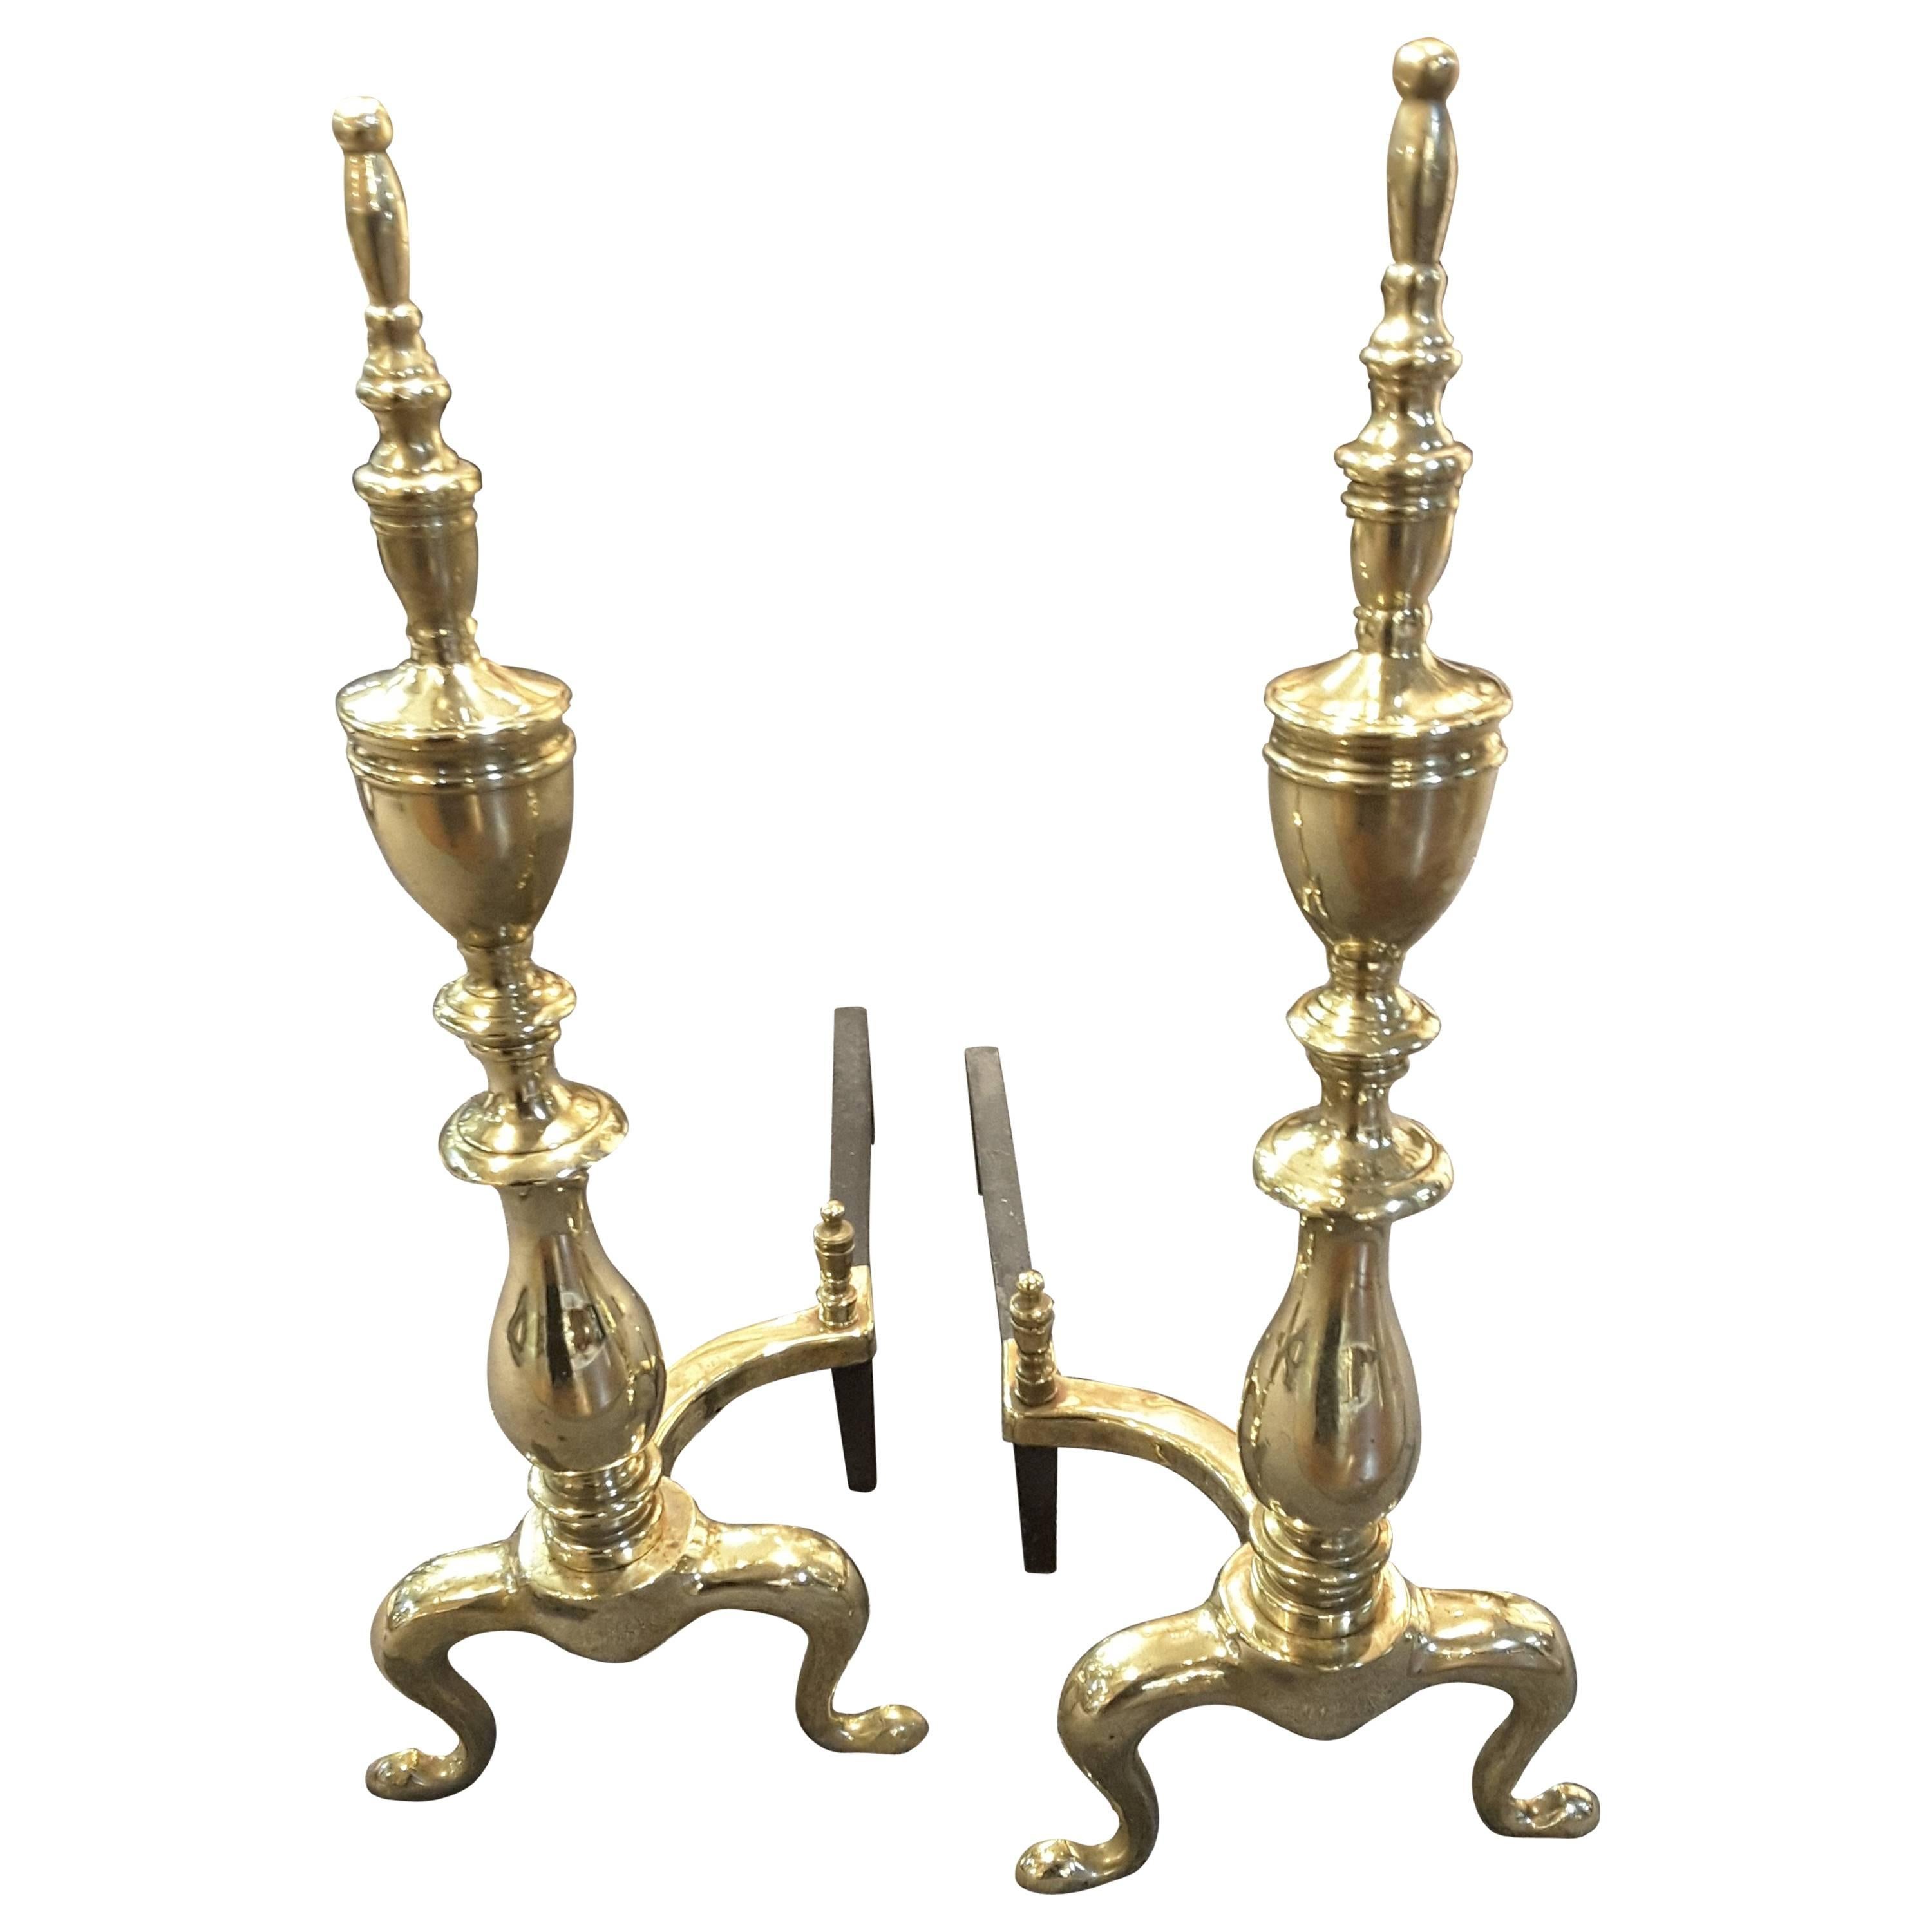 Pair of Late 19th Century Solid Brass Andirons with Log Stops